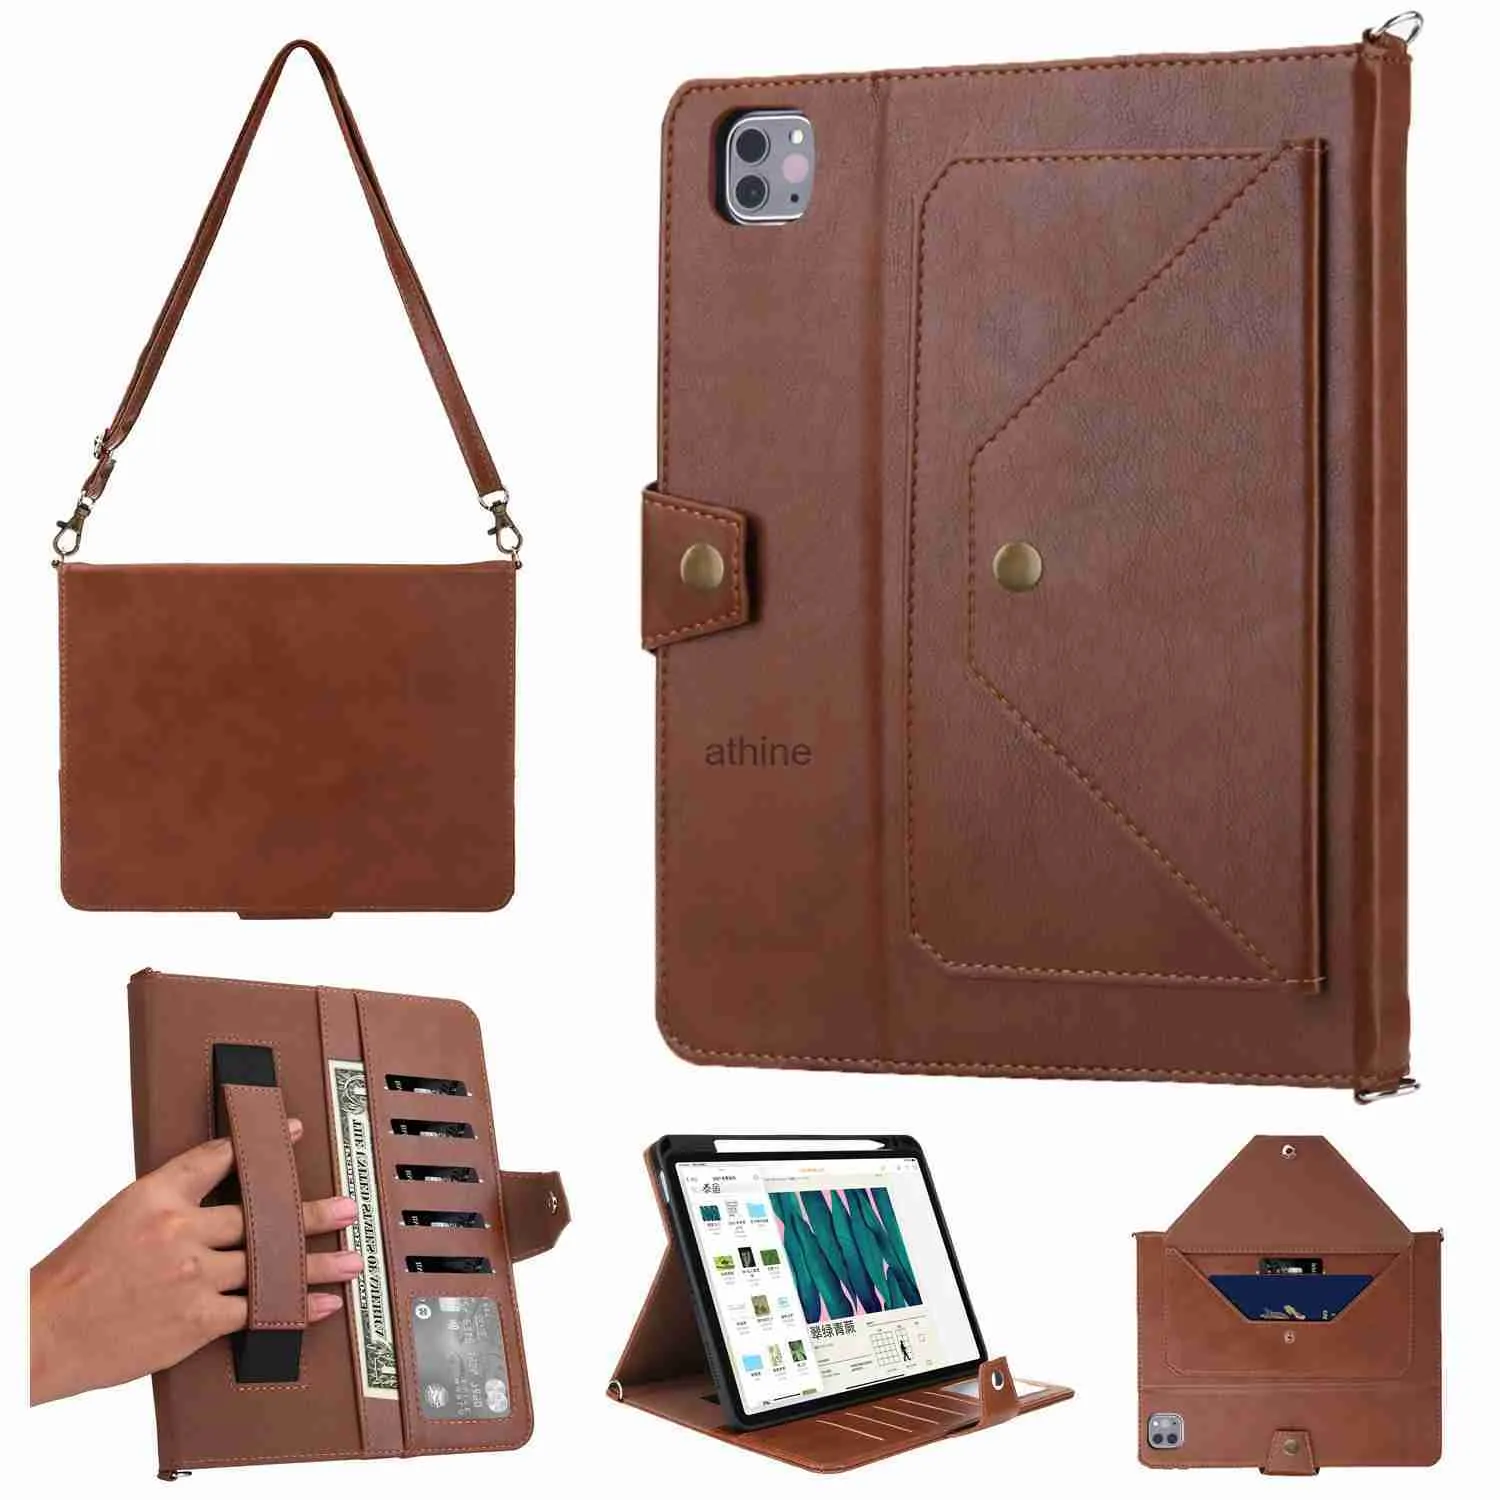 Tablet PC Cases Bags Tablet Shoulder Cover for iPad Pro 12.9 Inch Case Handstrap Leather Case Flip Wallet Smart Cover For iPad Pro 2021 With Pen Slot YQ240118